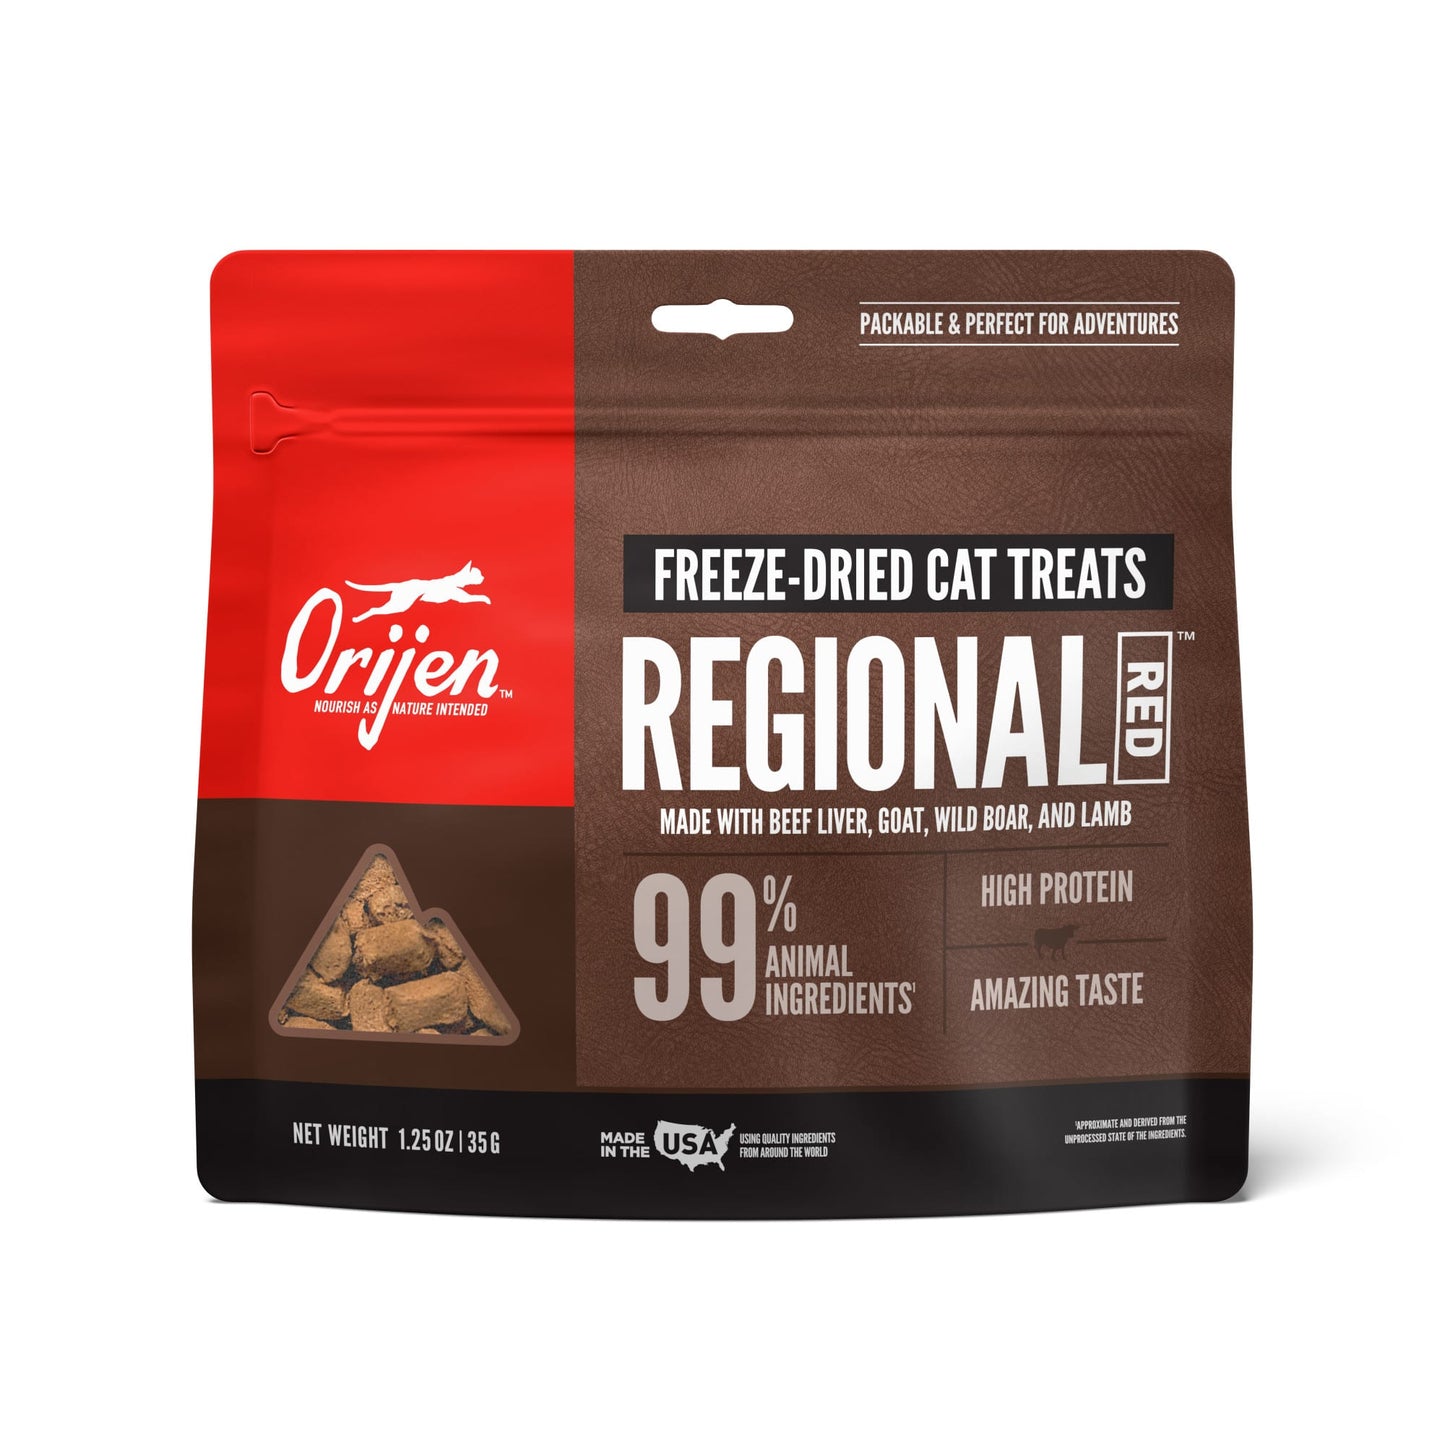 low in carbohydrates and free of grain fillers. Orijen cat food is designed to mimic the animals diverse and natural diet. Produced from fresh